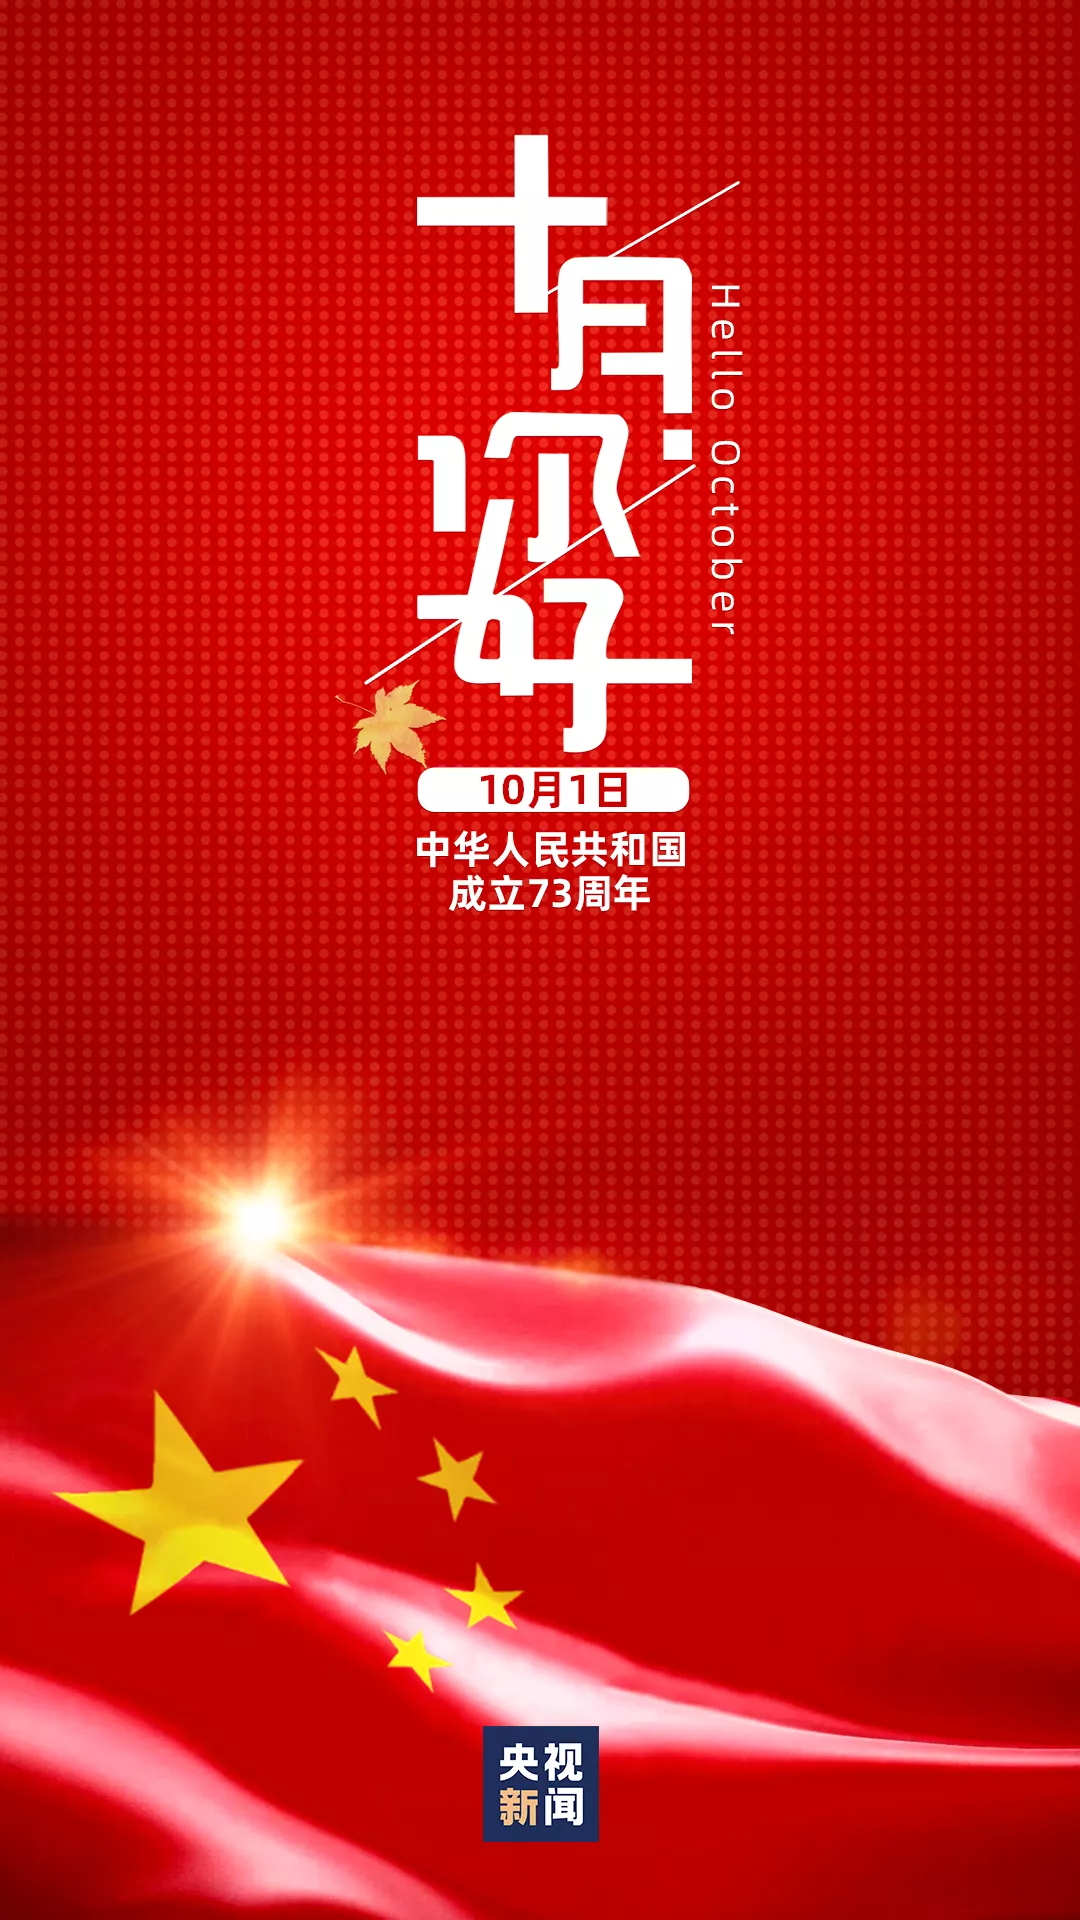 National Day Holiday Notice From Tianjin JieYa